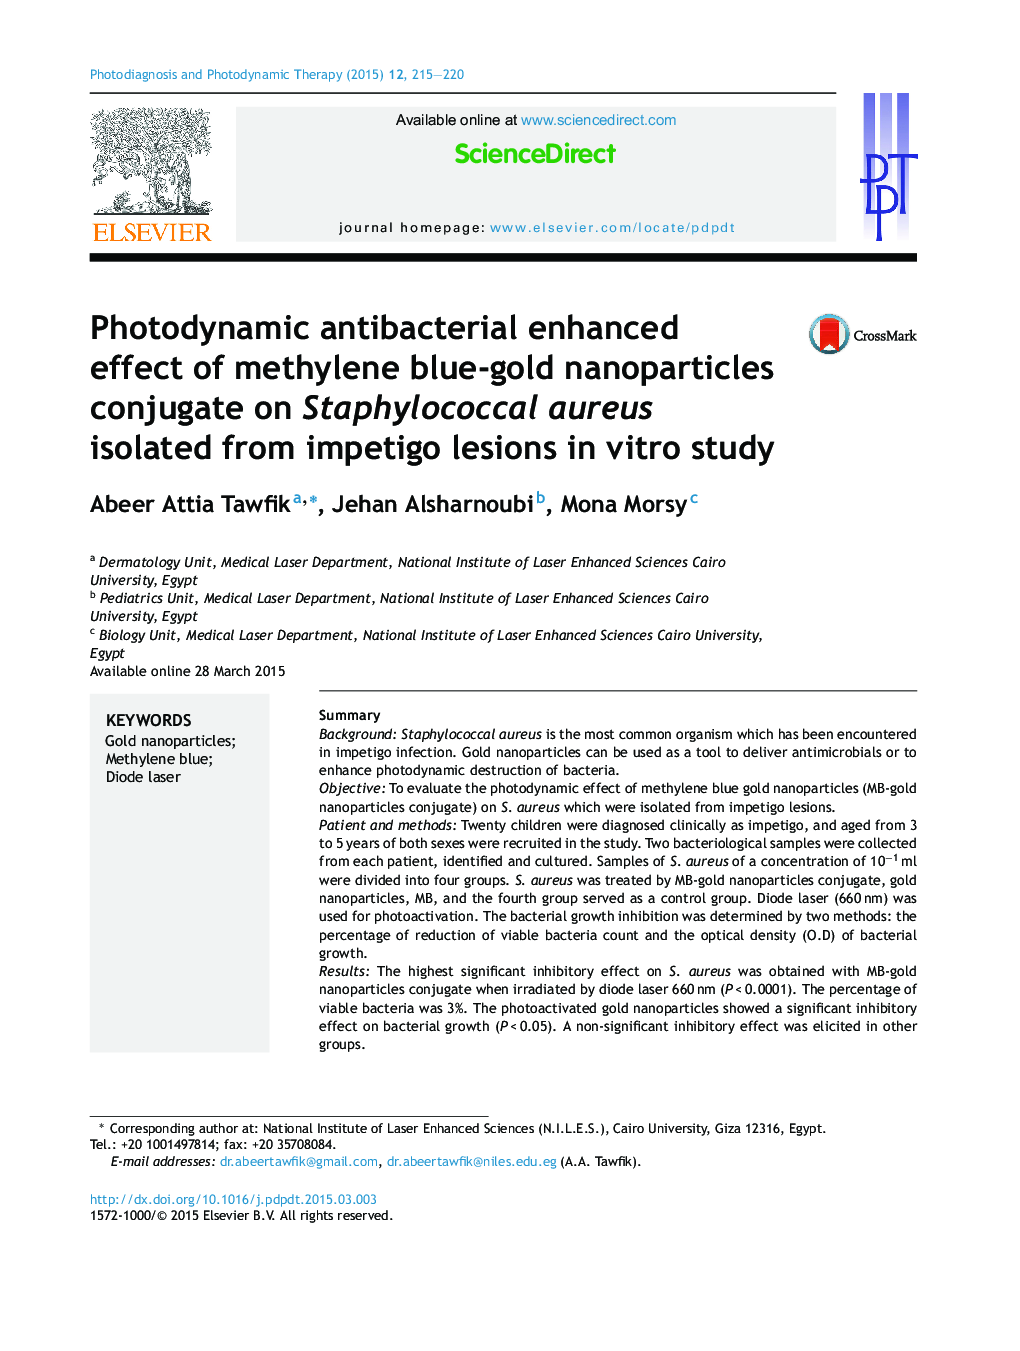 Photodynamic antibacterial enhanced effect of methylene blue-gold nanoparticles conjugate on Staphylococcal aureus isolated from impetigo lesions in vitro study